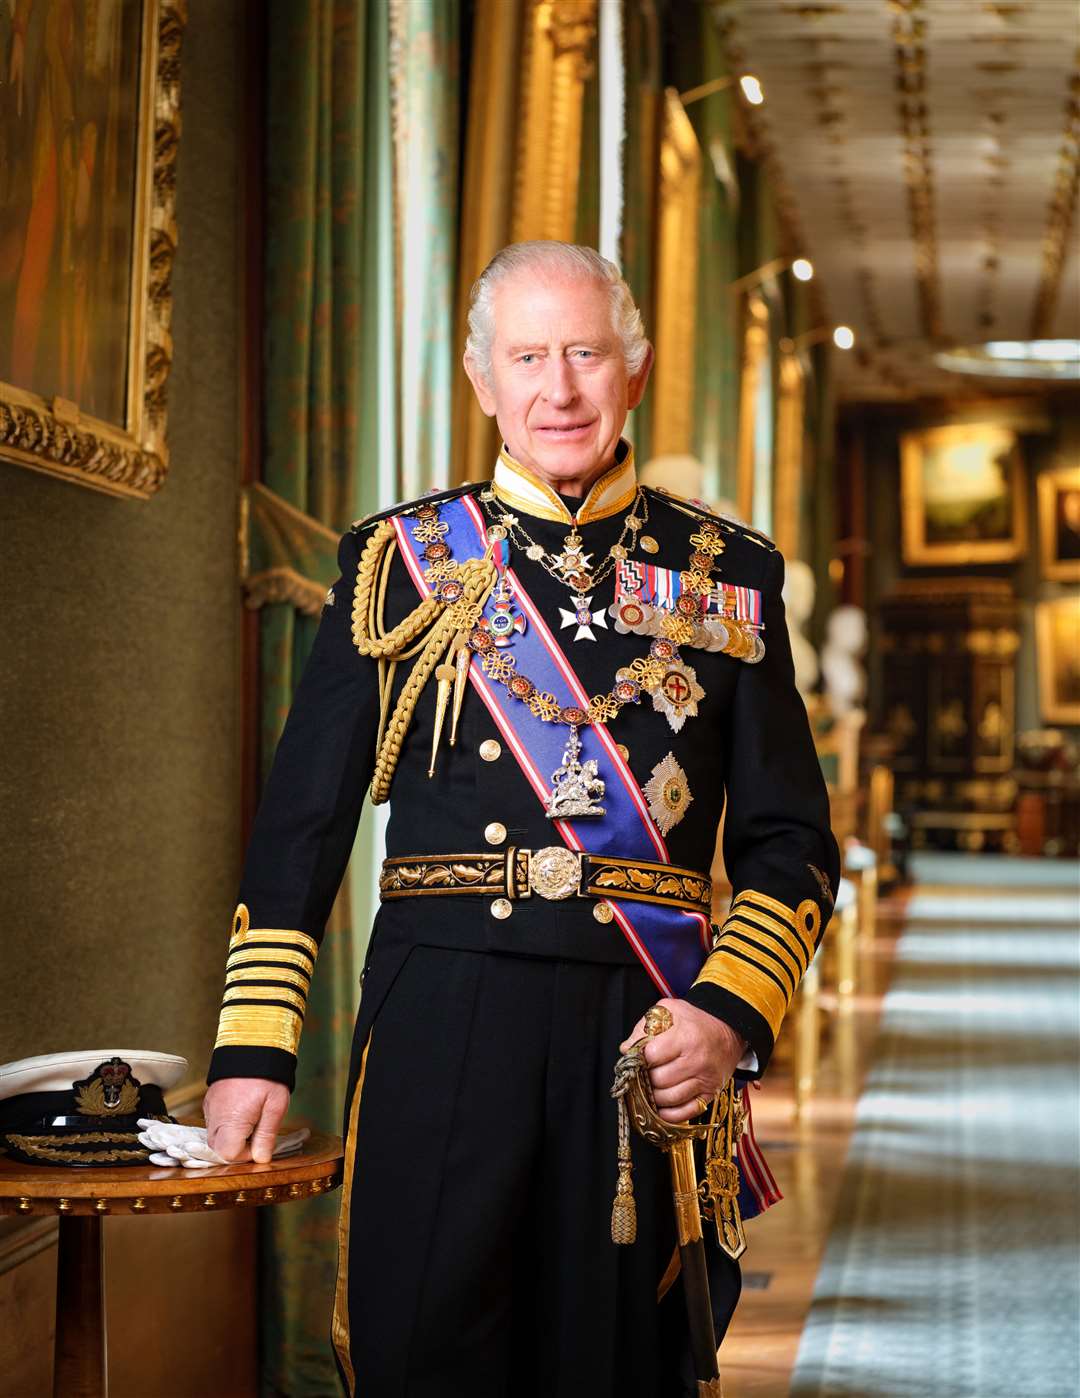 The Cabinet Office has released a new official portrait of the King for displaying in public buildings (Hugo Burnand/Royal Household/Cabinet Office/PA)